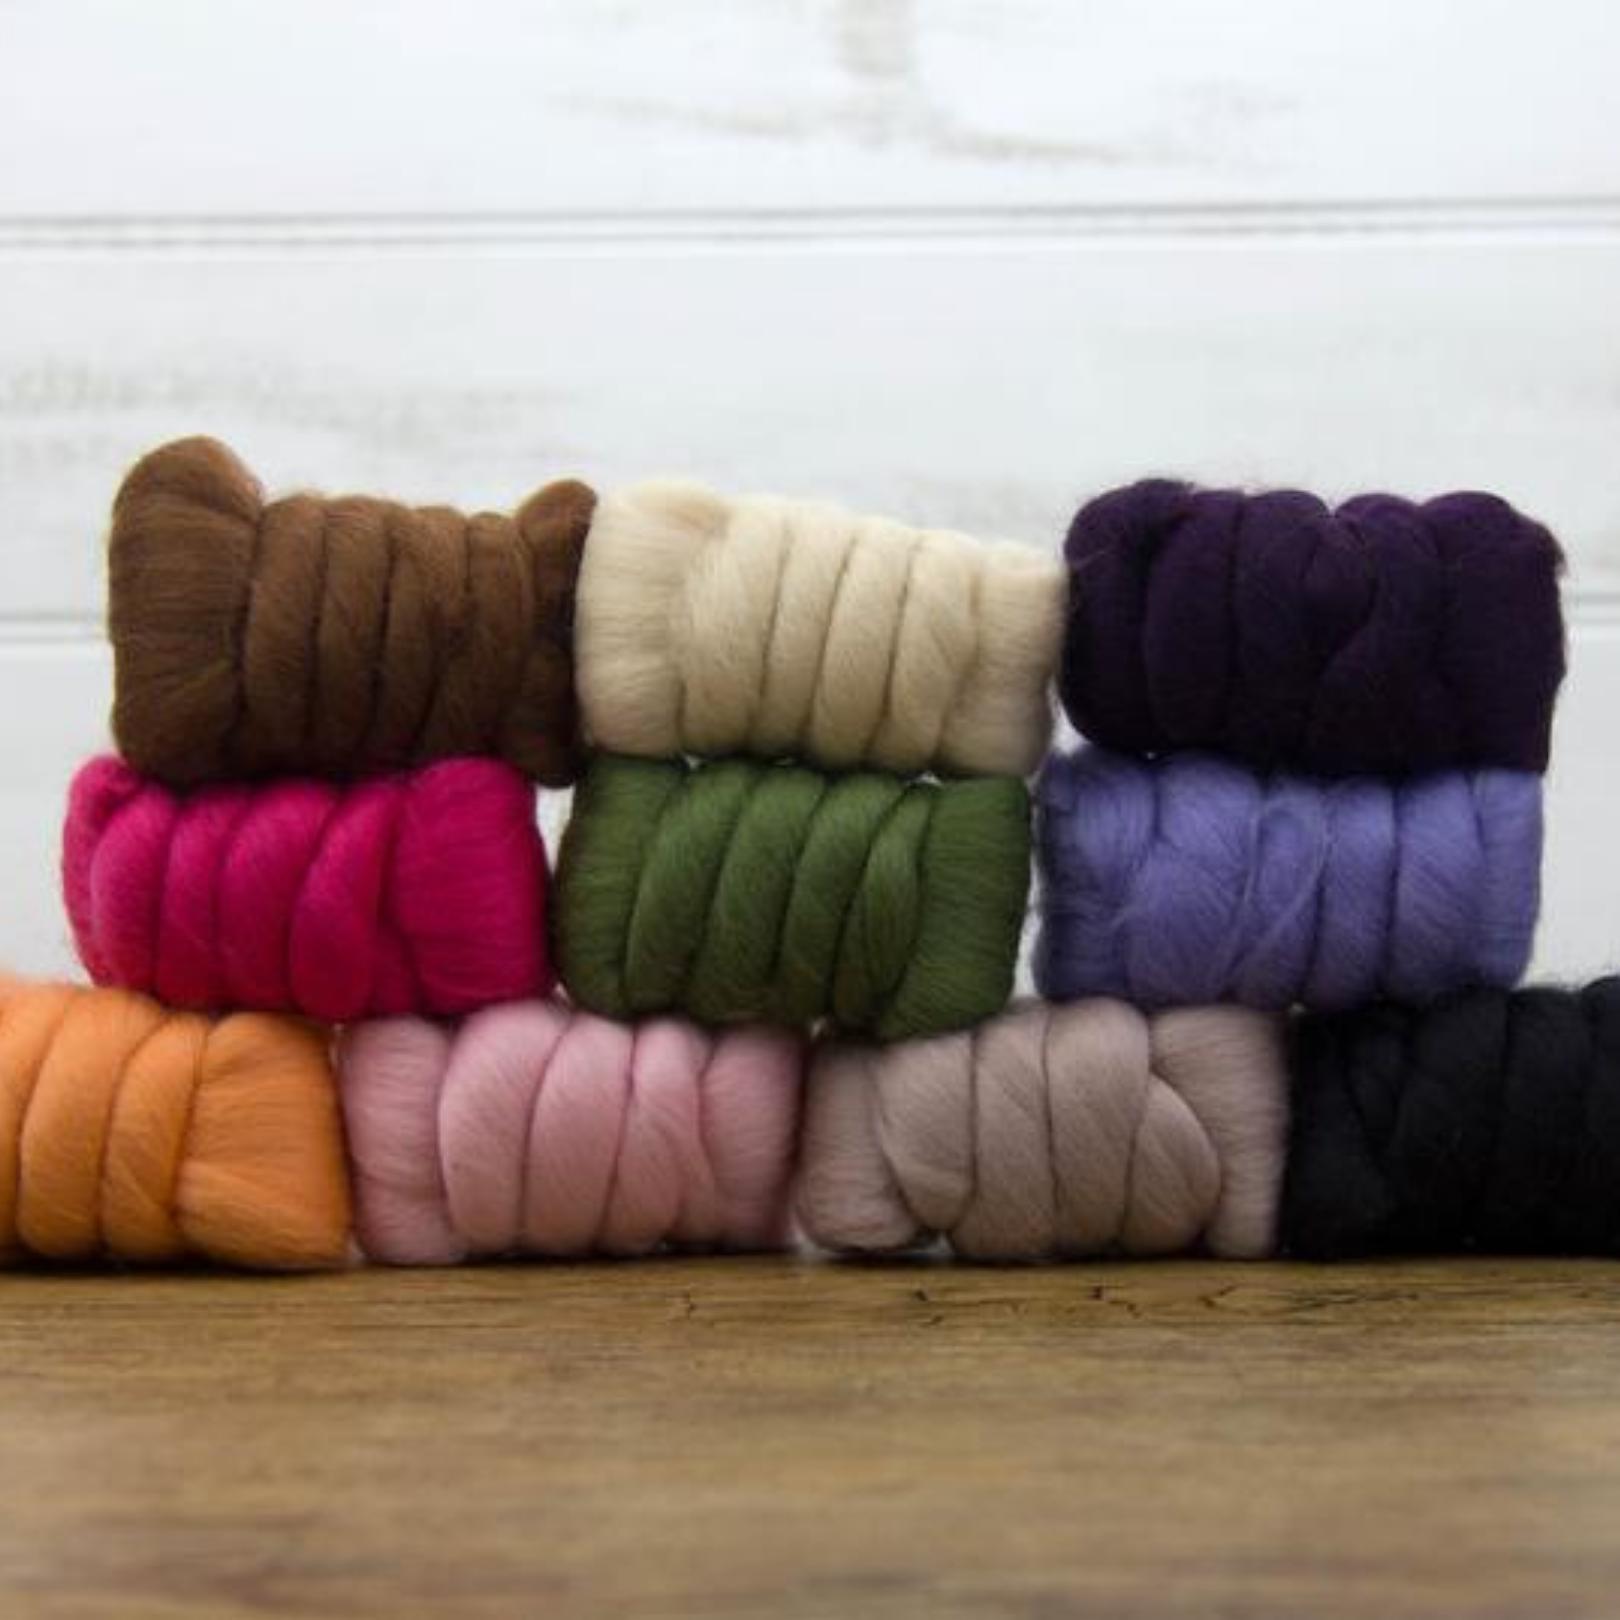 Mixed Merino Wool Variety Pack | Mystery Merino (Multicolored Surprise) 250 Grams, 23 Micron - Textile Indie 